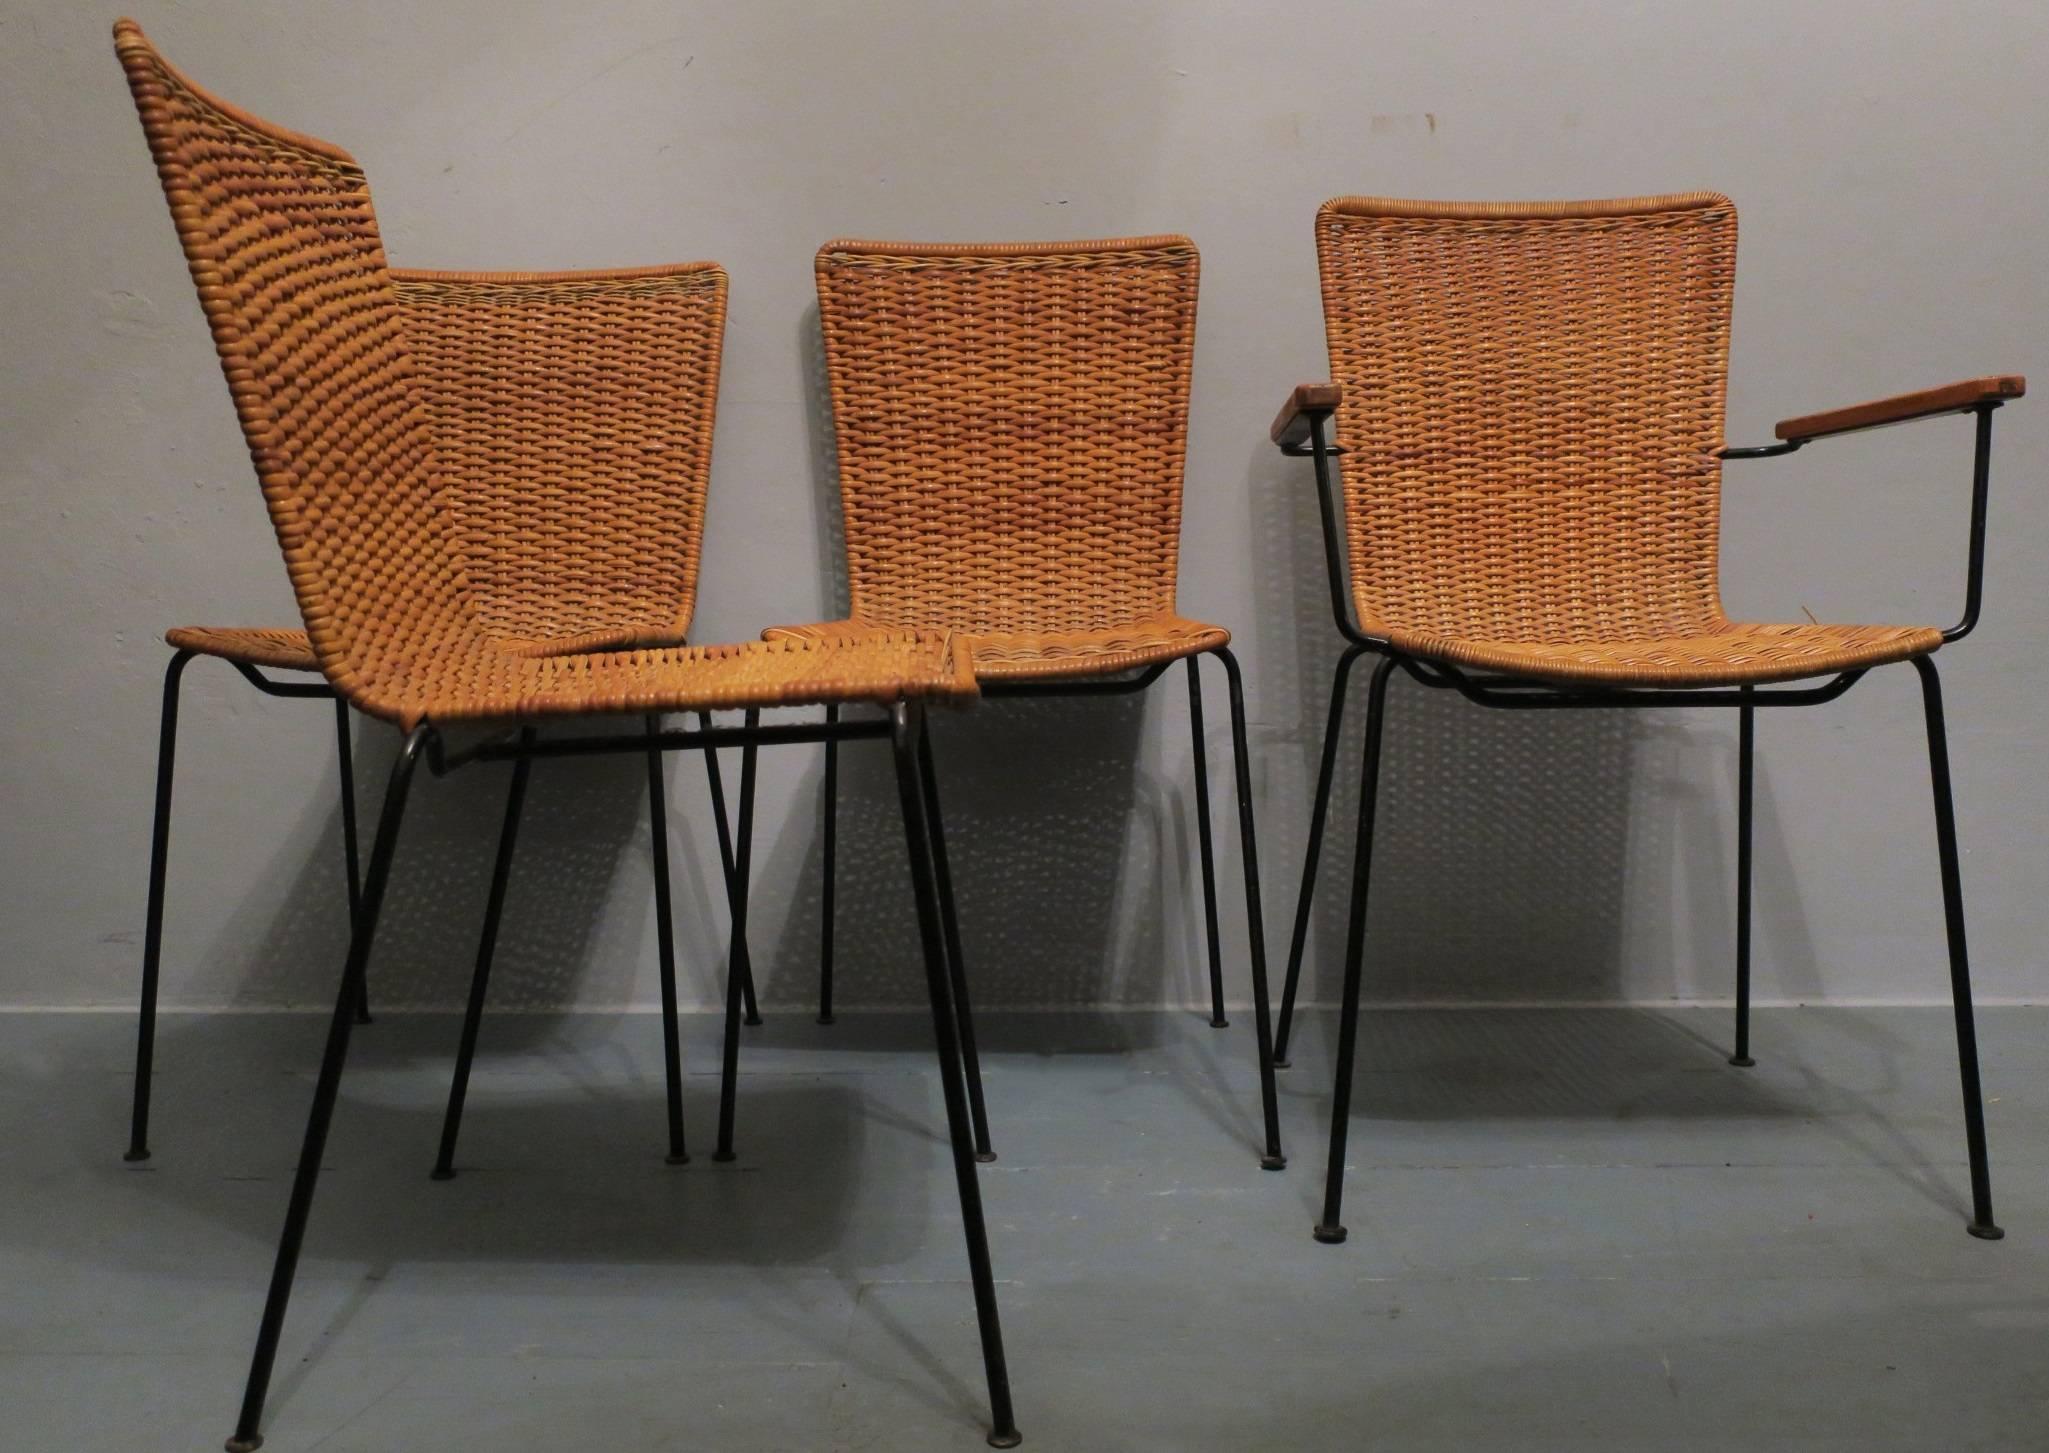 A set of four midcentury rattan dining chairs on slender iron frames, one chair with armrests.
All in very good condition.